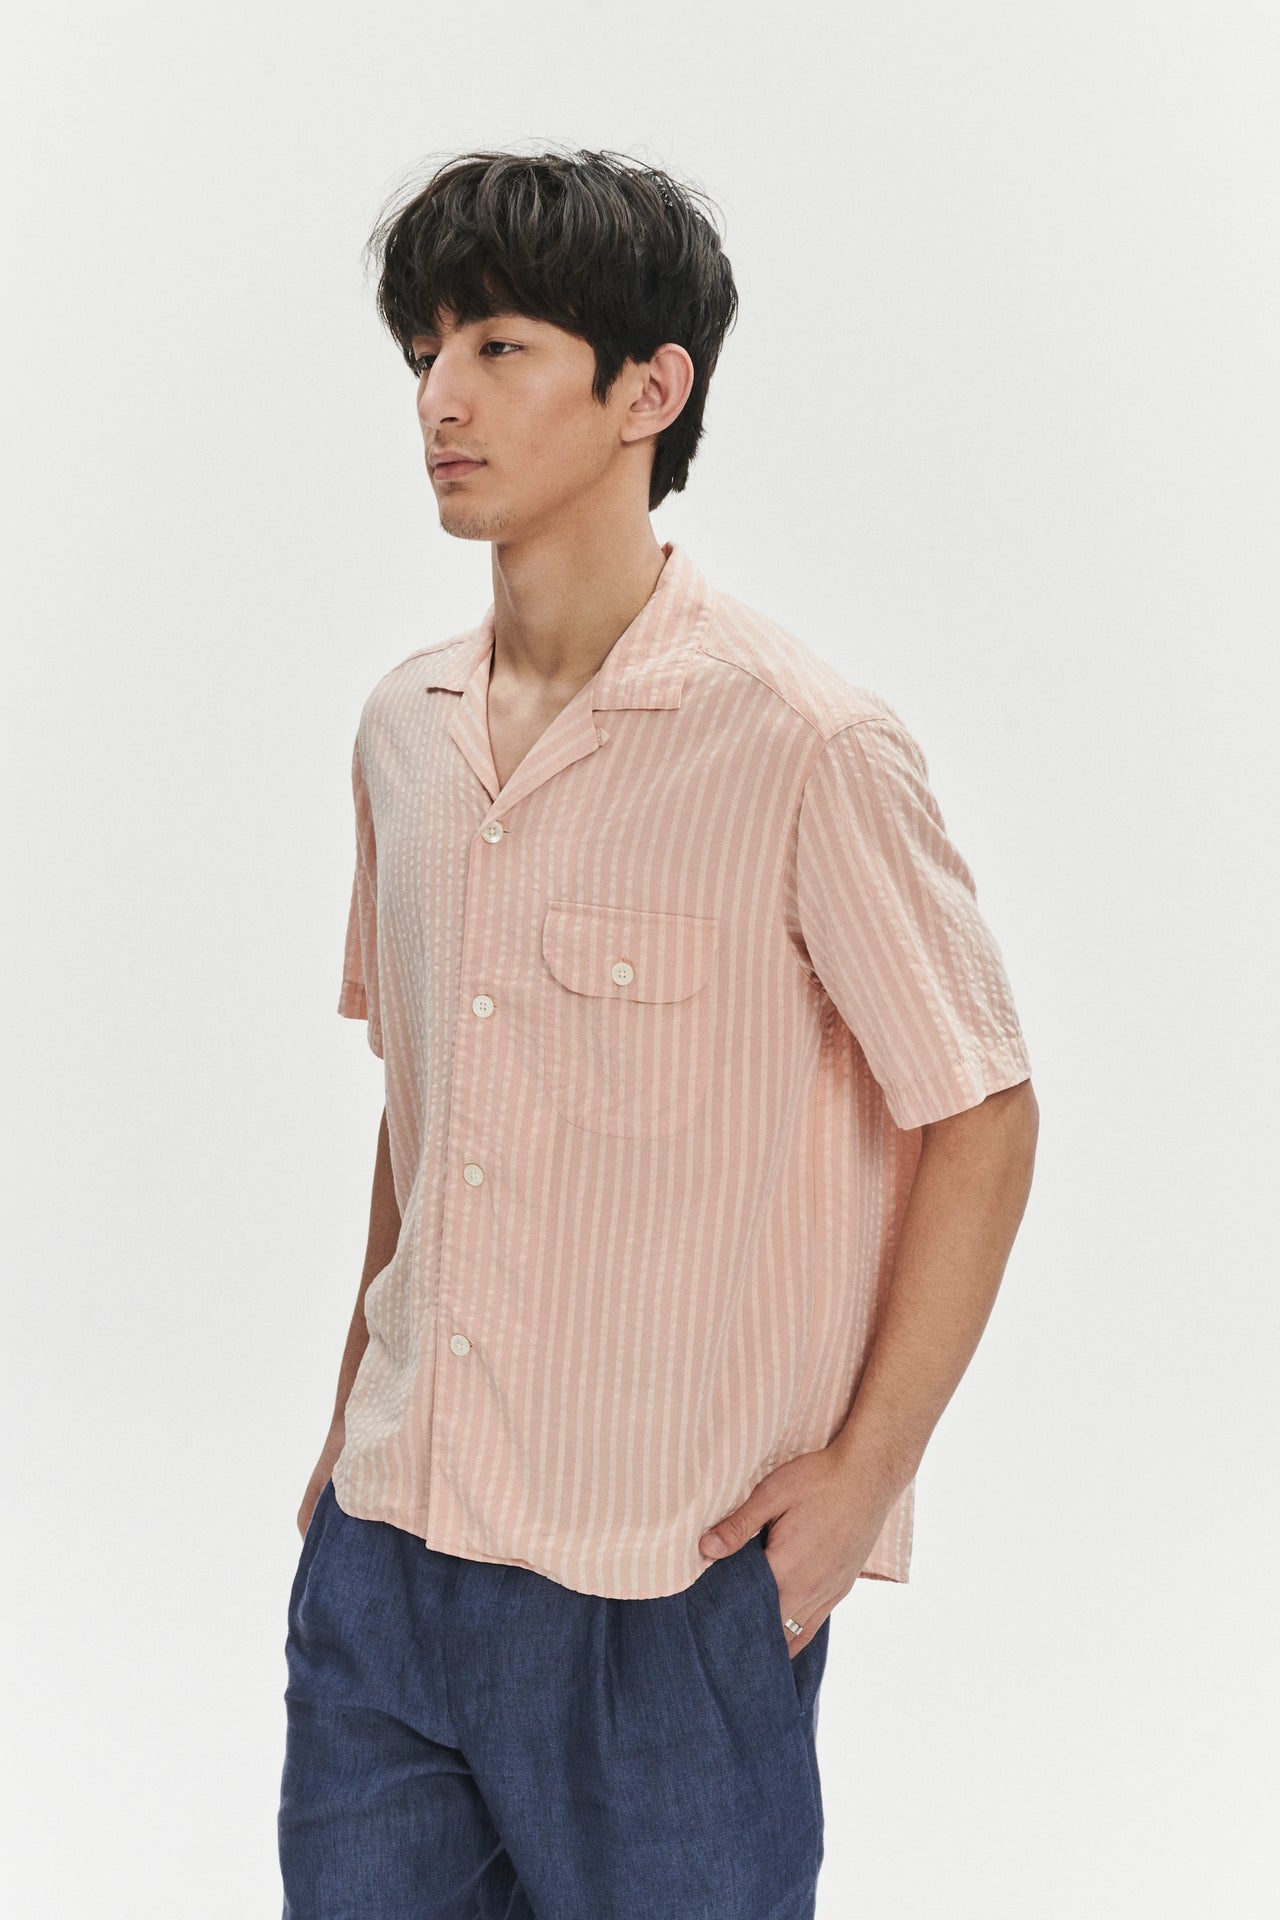 Short Sleeve Camp Collar Shirt in a Peach Pink Striped Soft Portuguese Lyocell